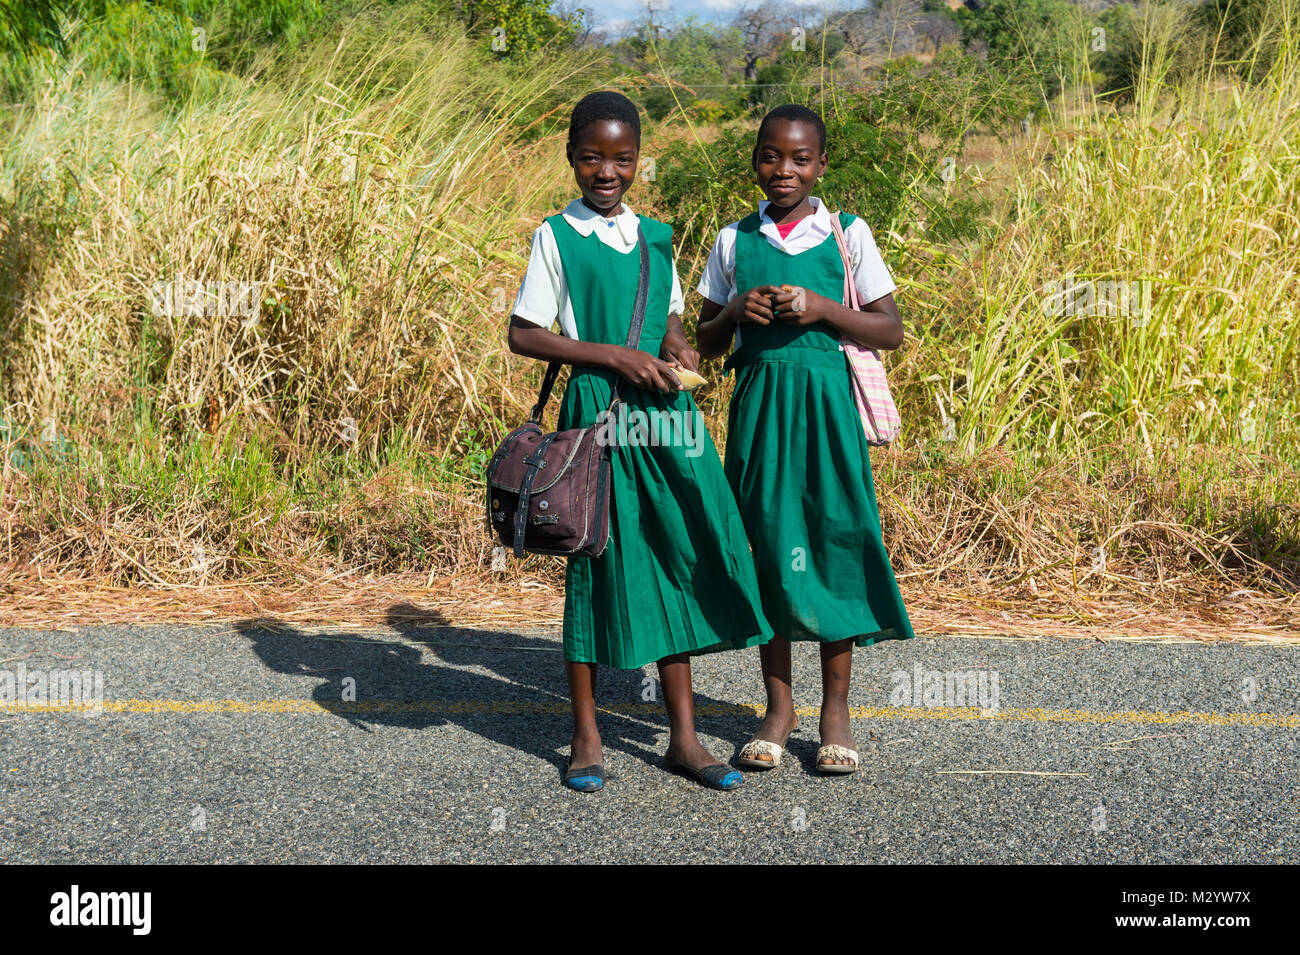 Young school girl on their way home, Cape Maclear, Malawi, Africa Stock Photo